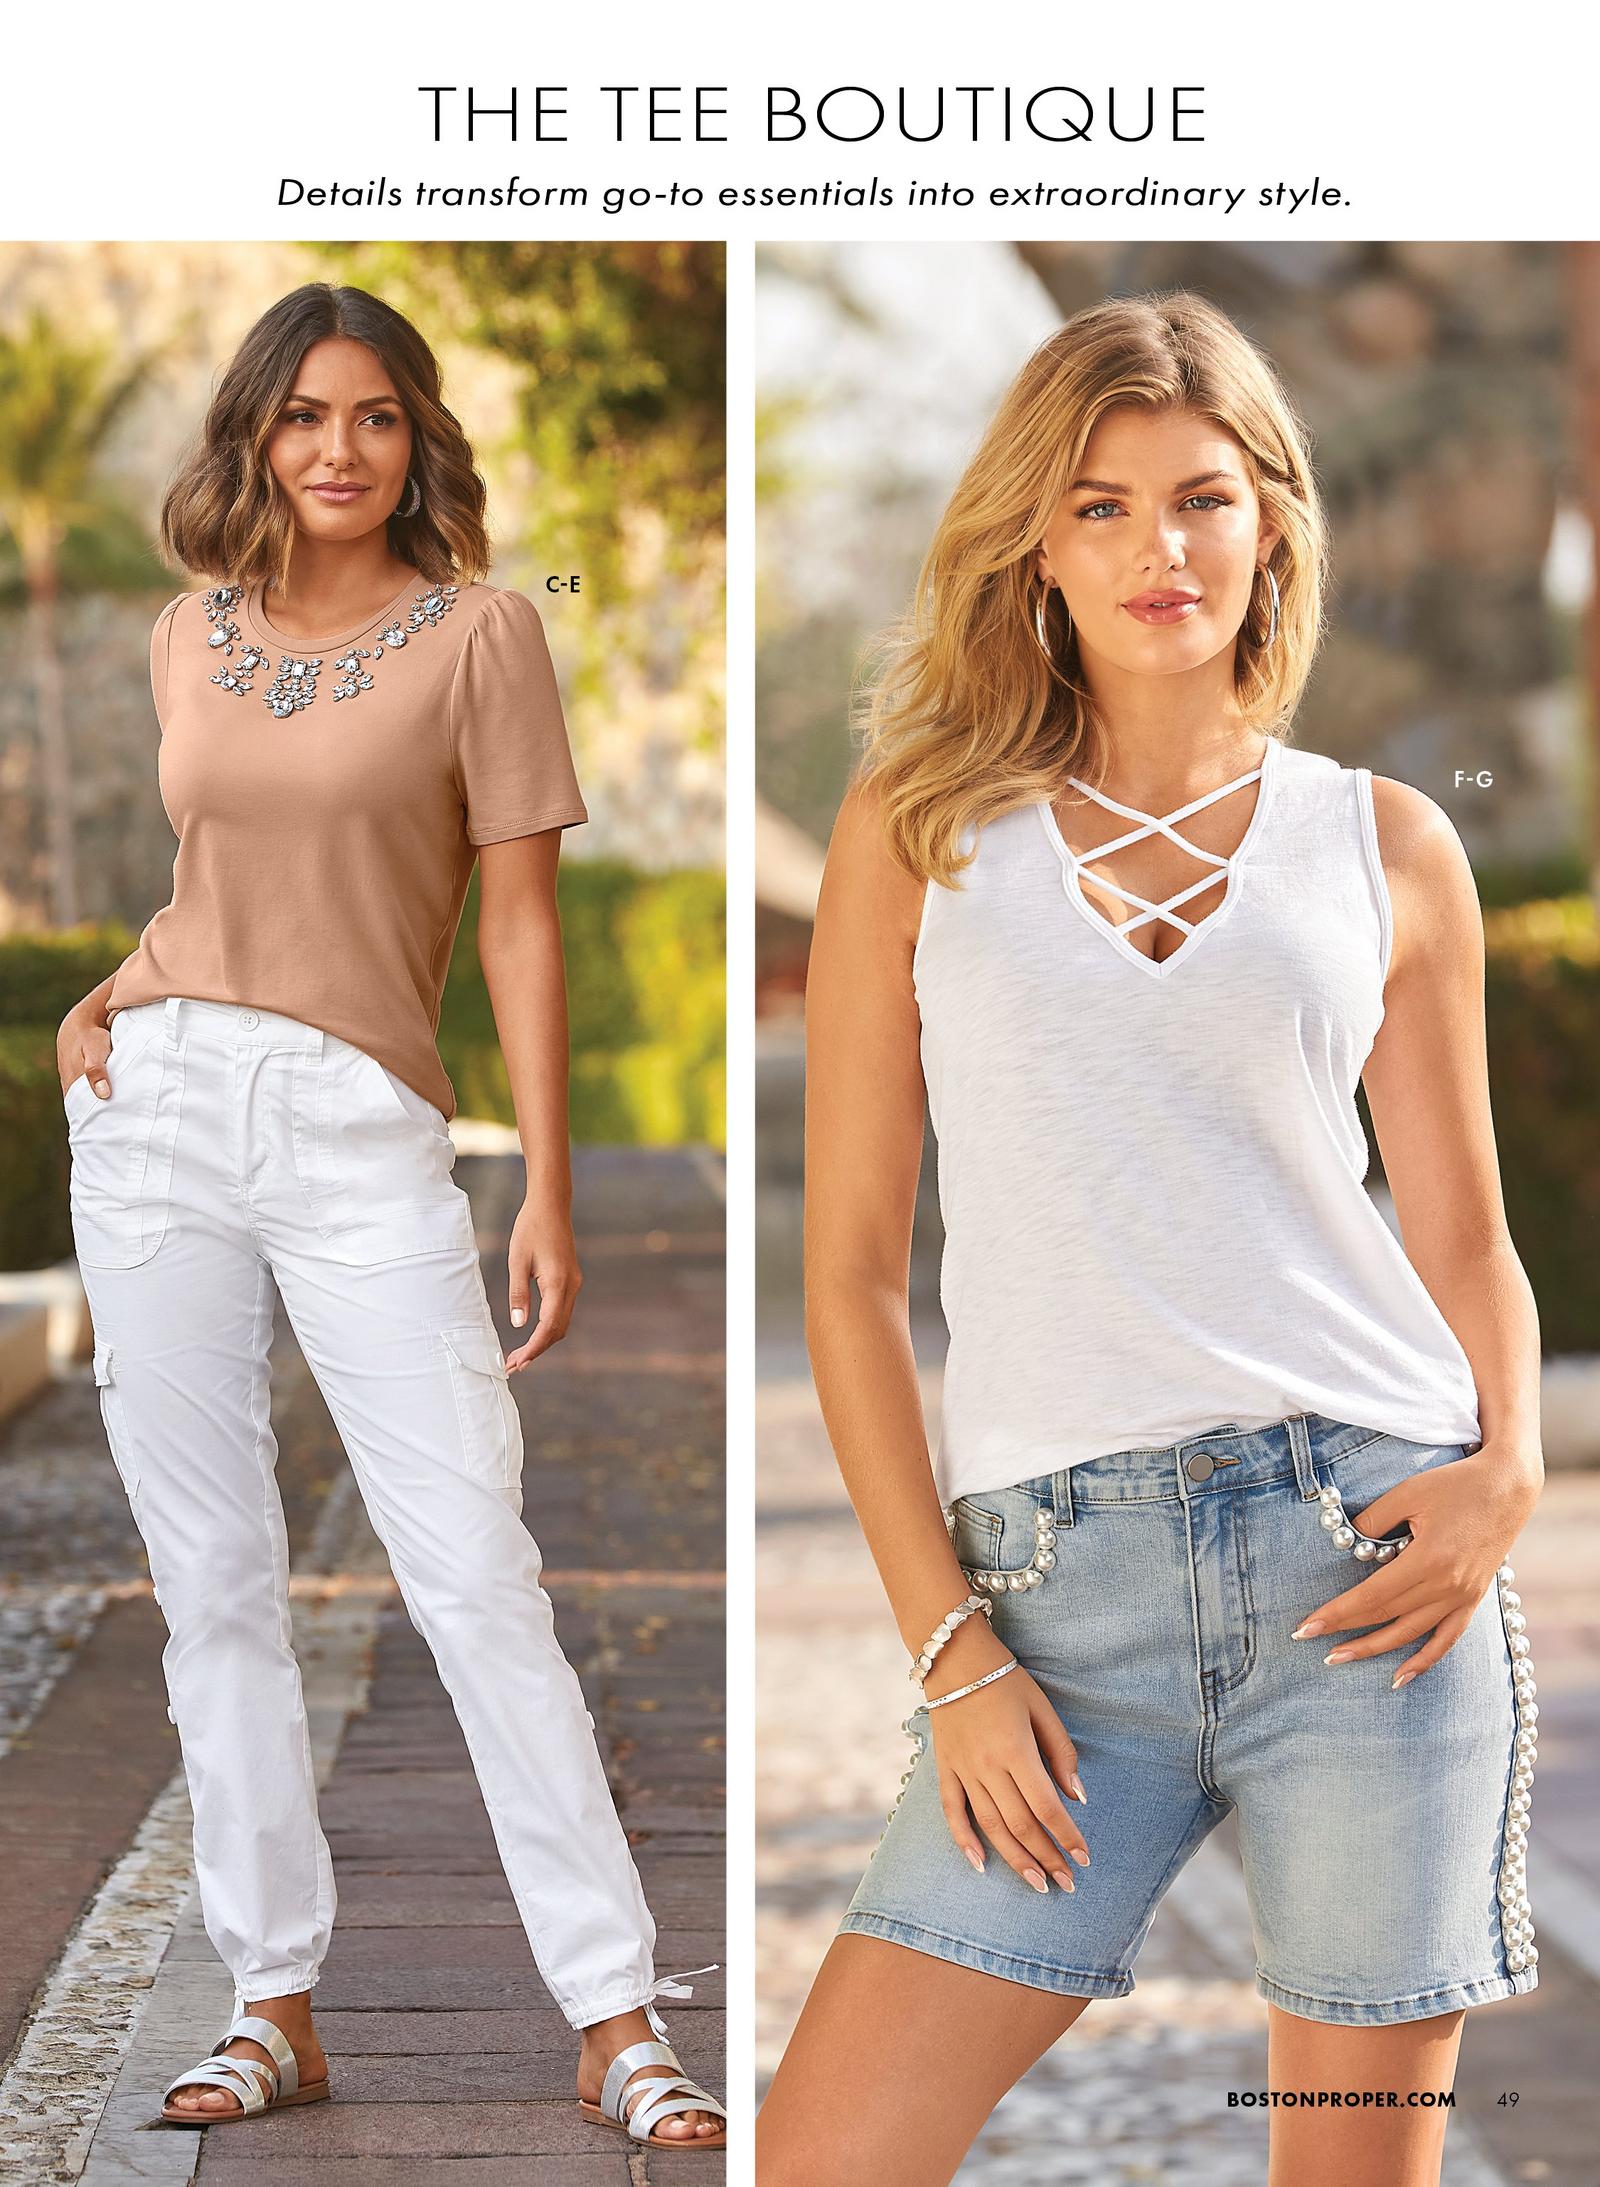 left model wearing a jewel embellished tan tee shirt, white cargo pants, and silver strappy sandals. right model wearing a white sleeveless x-neck top and denimm shorts.